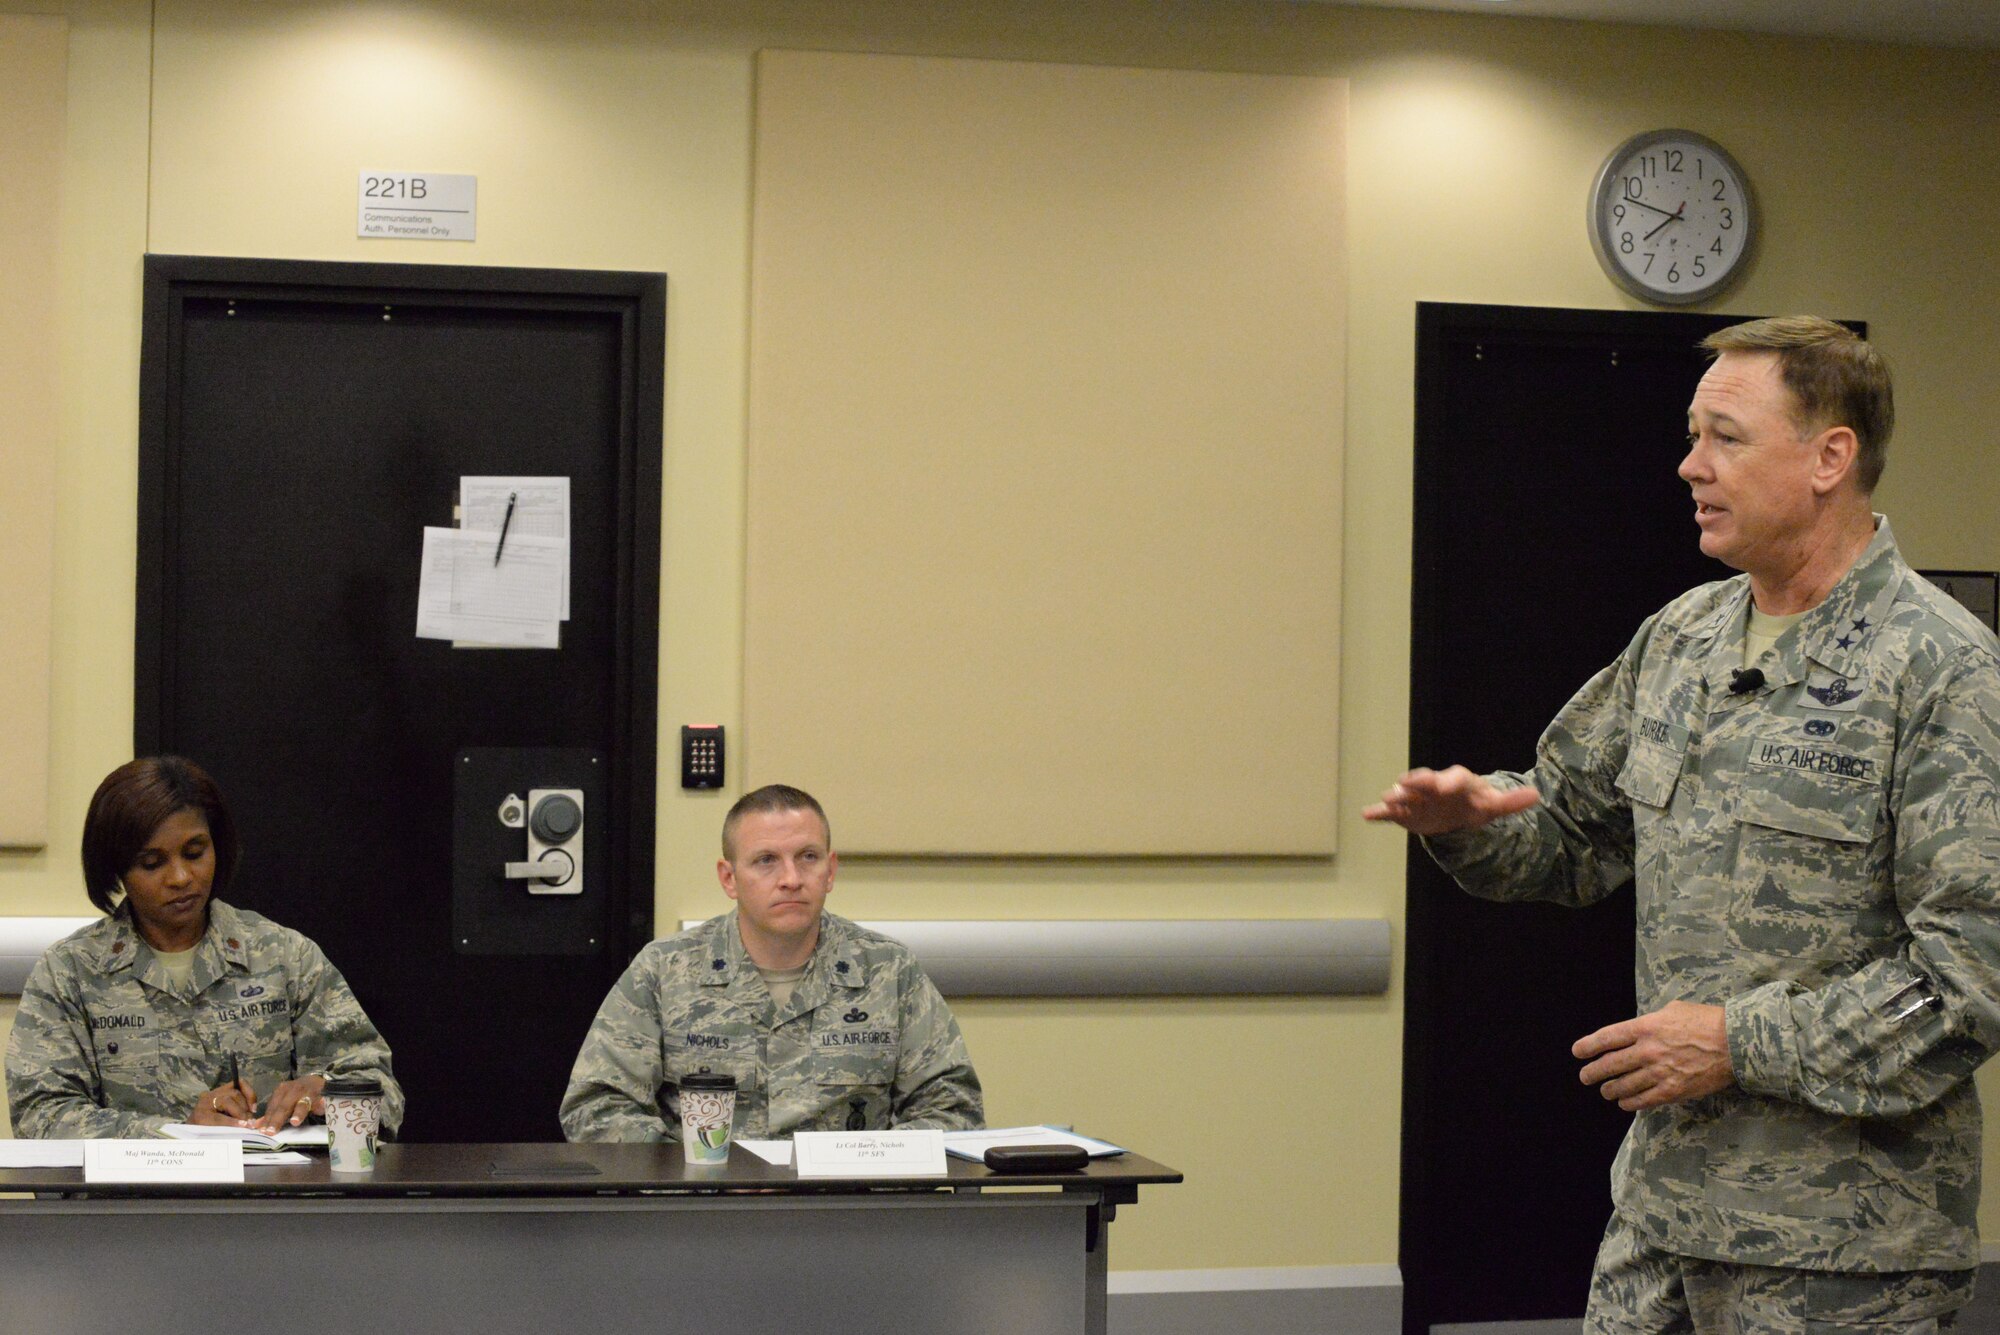 Air Force District of Washington Commander Maj. Gen. Darryl Burke gives opening remarks during the 2016 AFDW Commander’s Course at Joint Base Andrews, Md., June 6, 2016.  The four-day event provides opportunities for incoming commanders to familiarize themselves with the unique issues of commanding a unit in the National Capital Region.